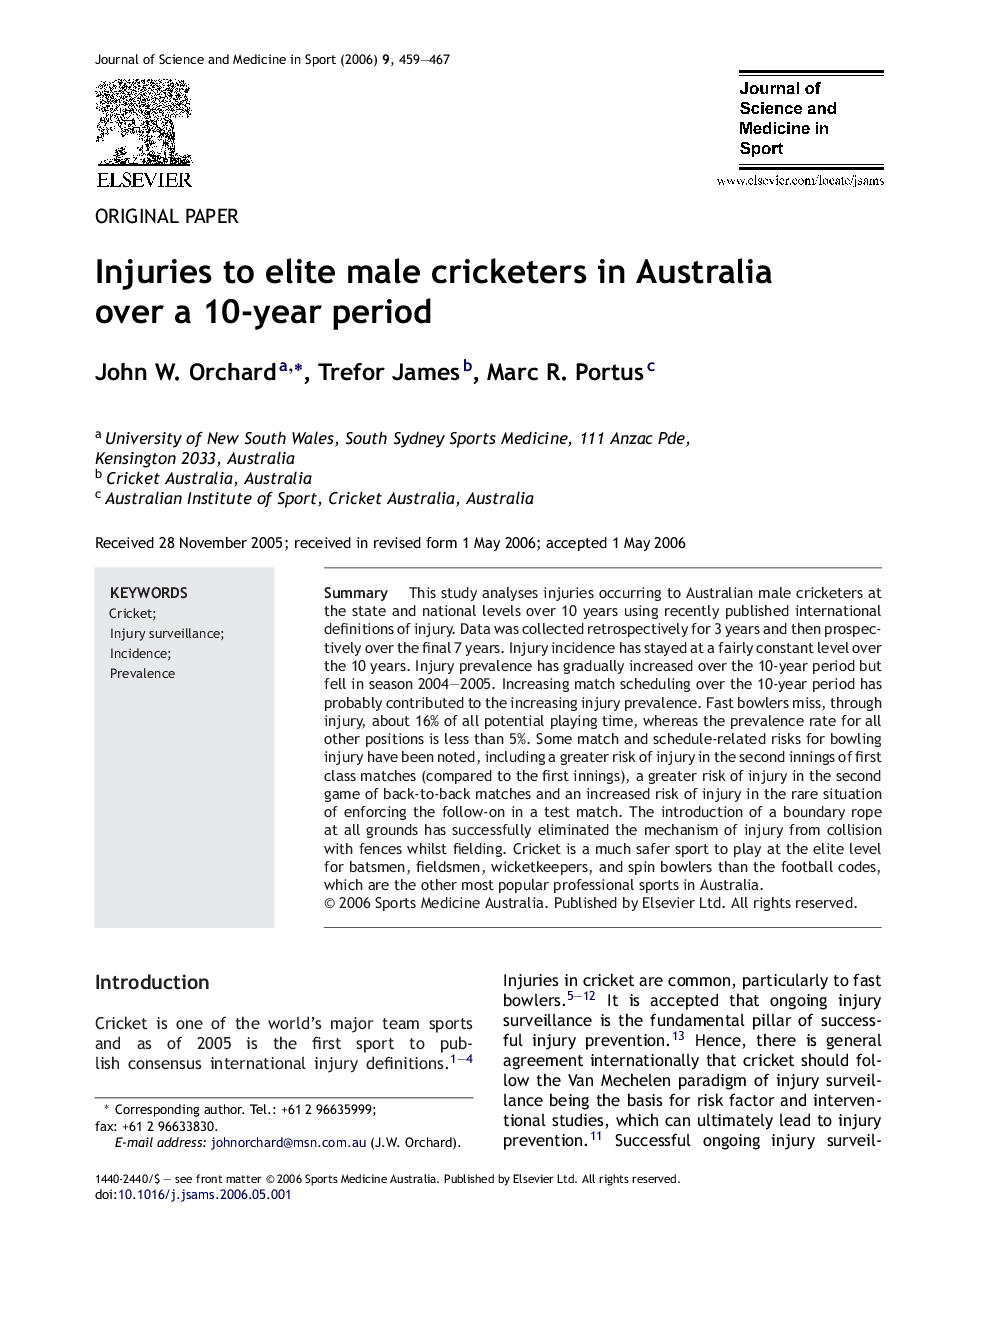 Injuries to elite male cricketers in Australia over a 10-year period